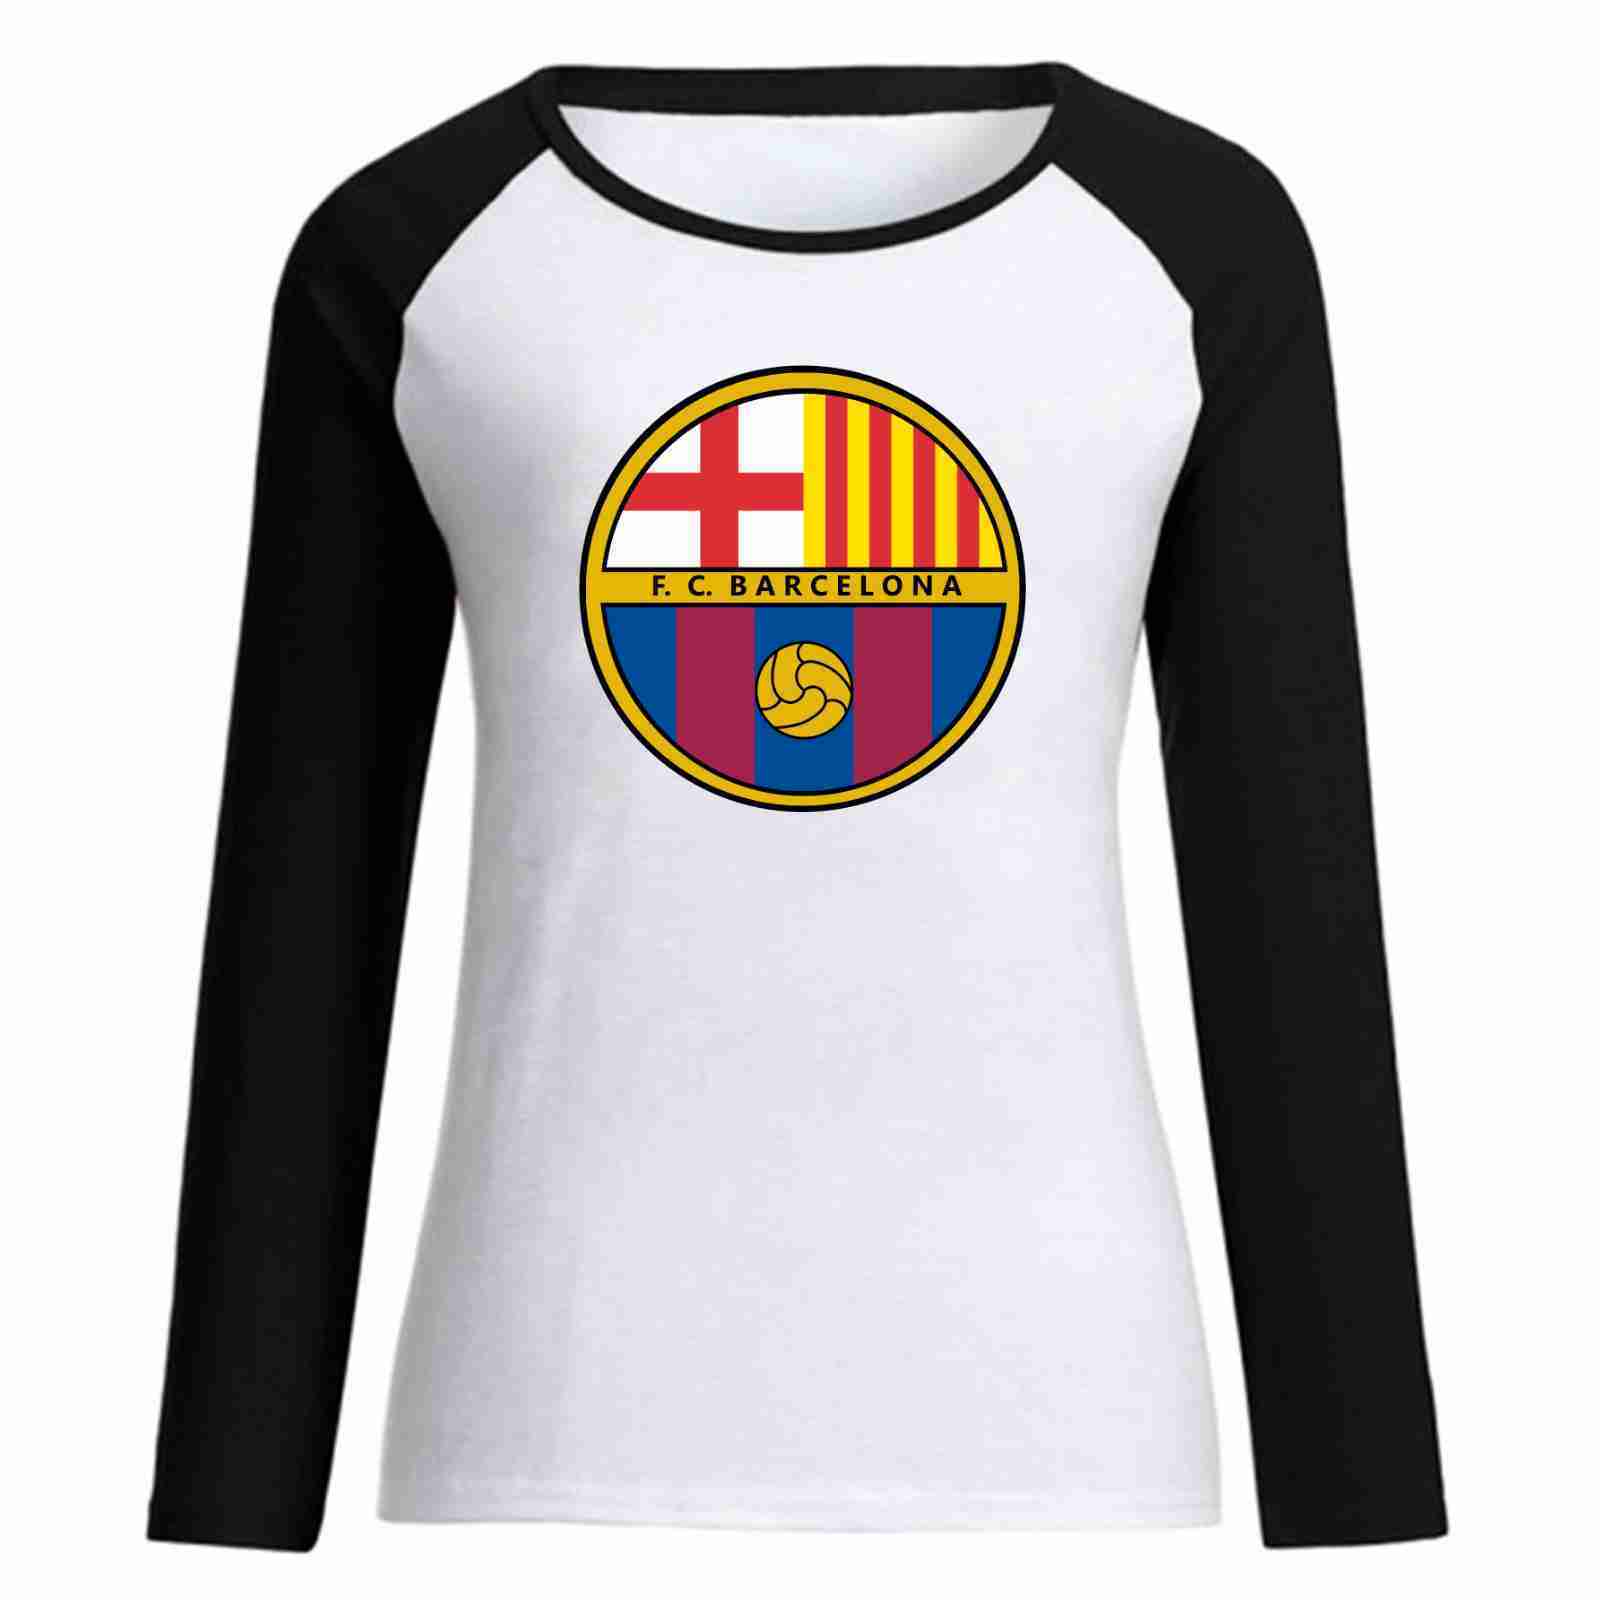 FC BARCELONA Official Round Symbol Womens Long Sleeve TShirts